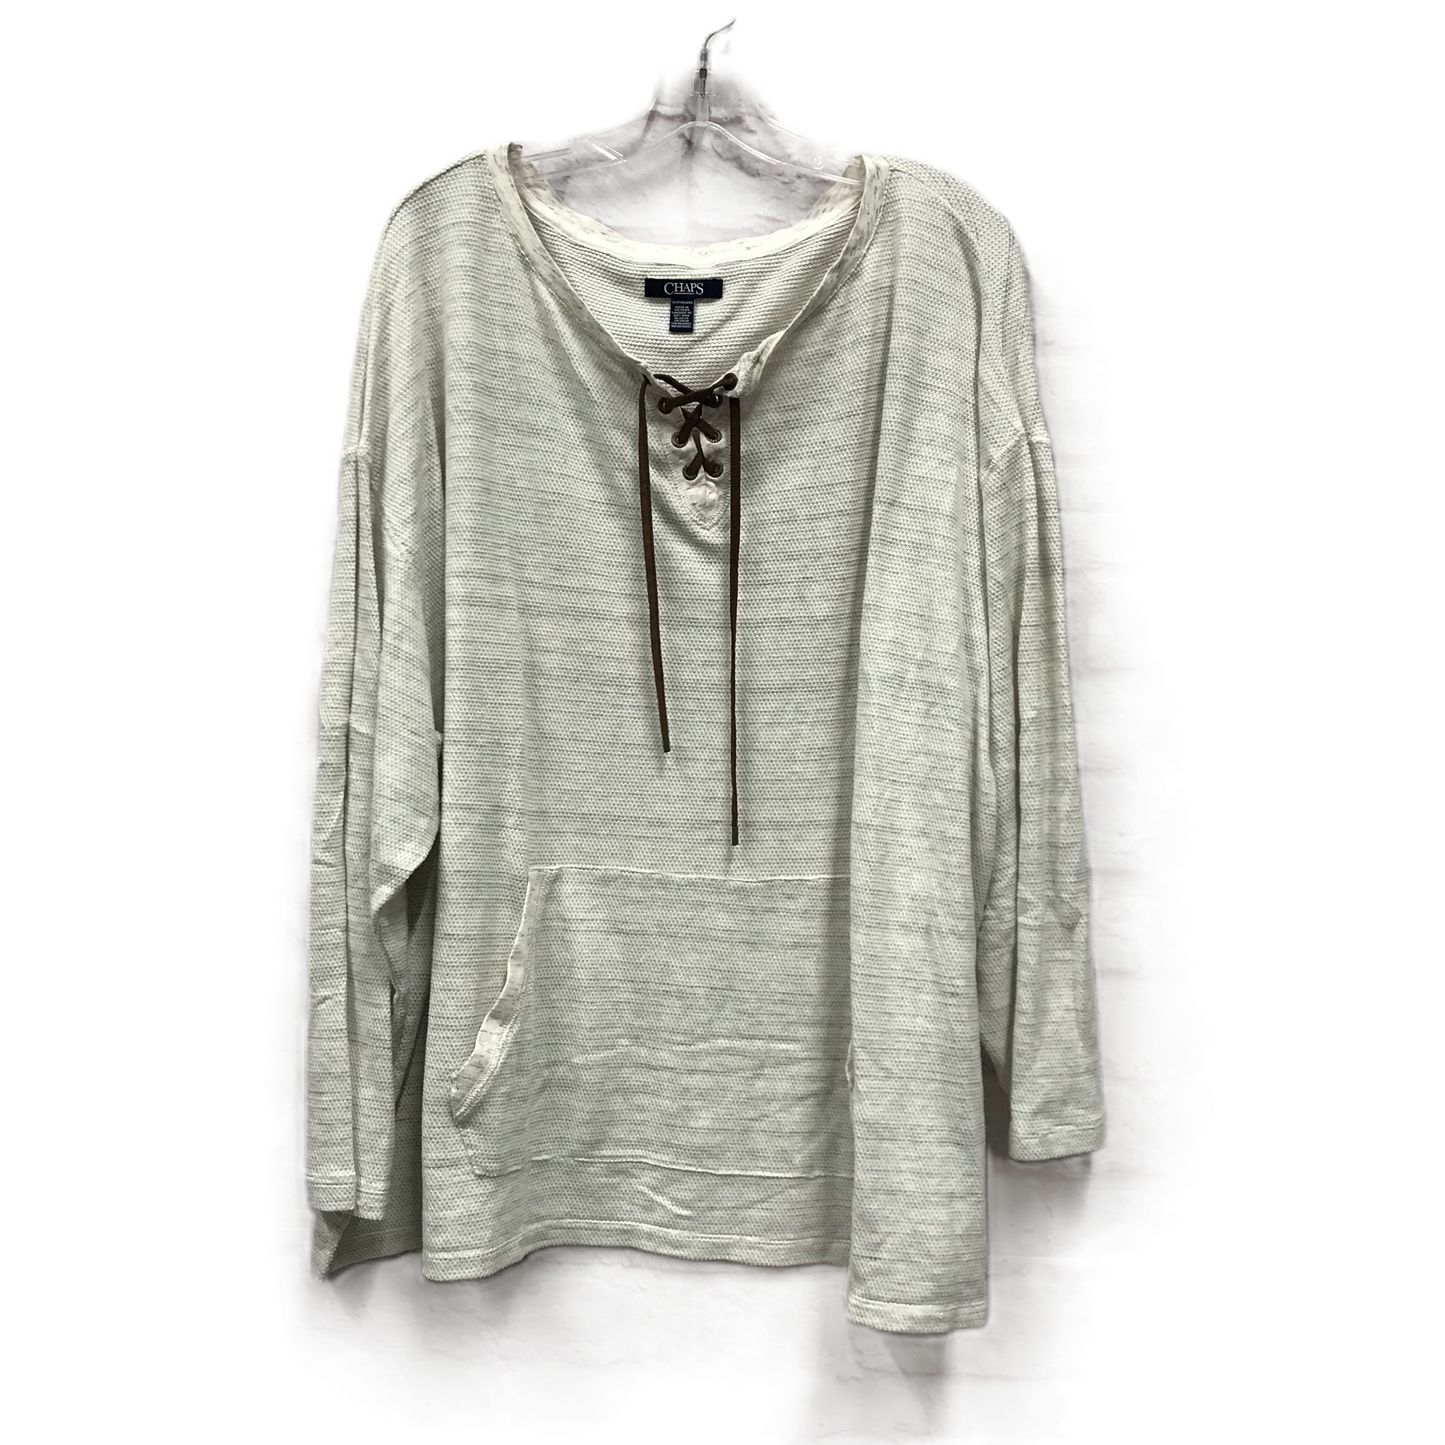 Cream & Grey Top Long Sleeve By Chaps, Size: 3x